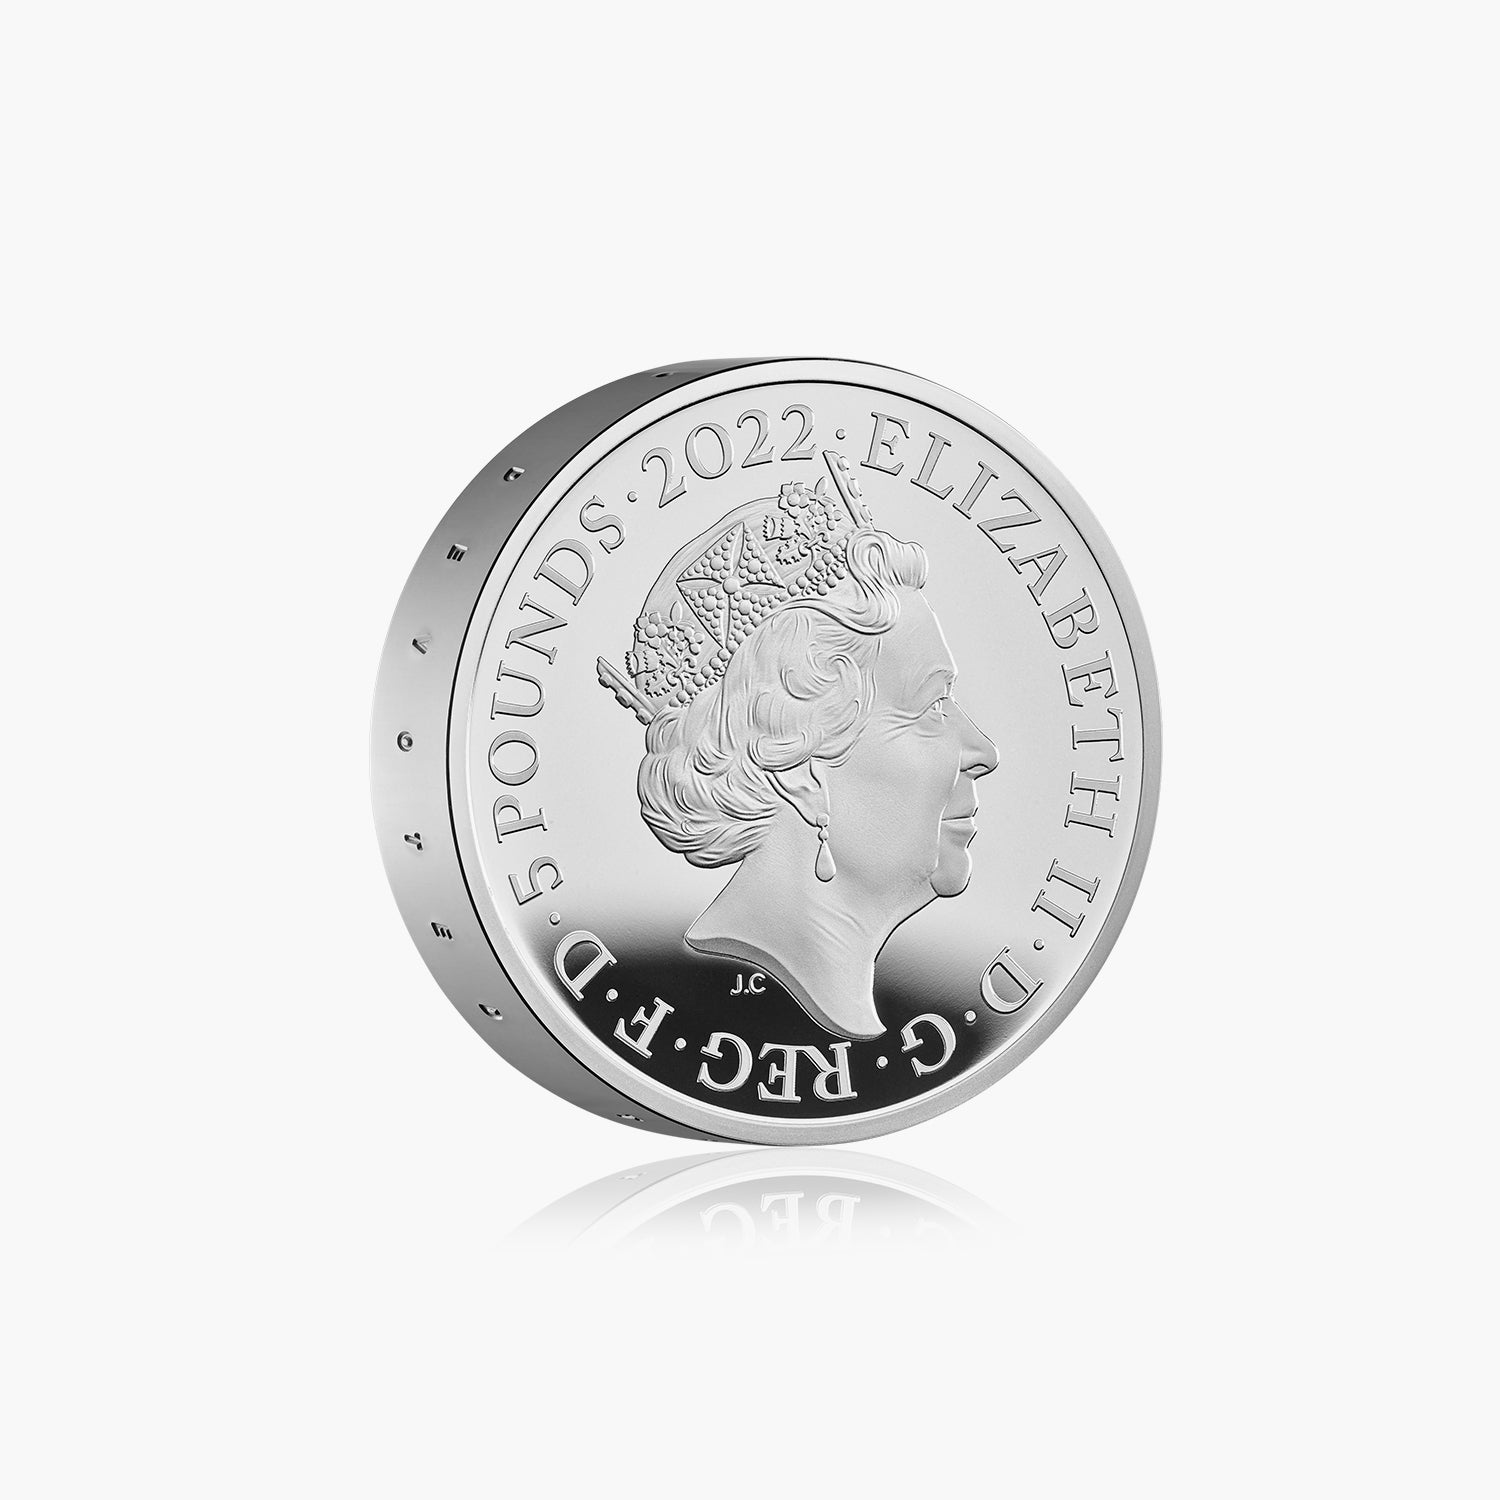 The Queen’s Reign Charity & Patronage 2022 UK £5 Silver Proof Piedfort Coin